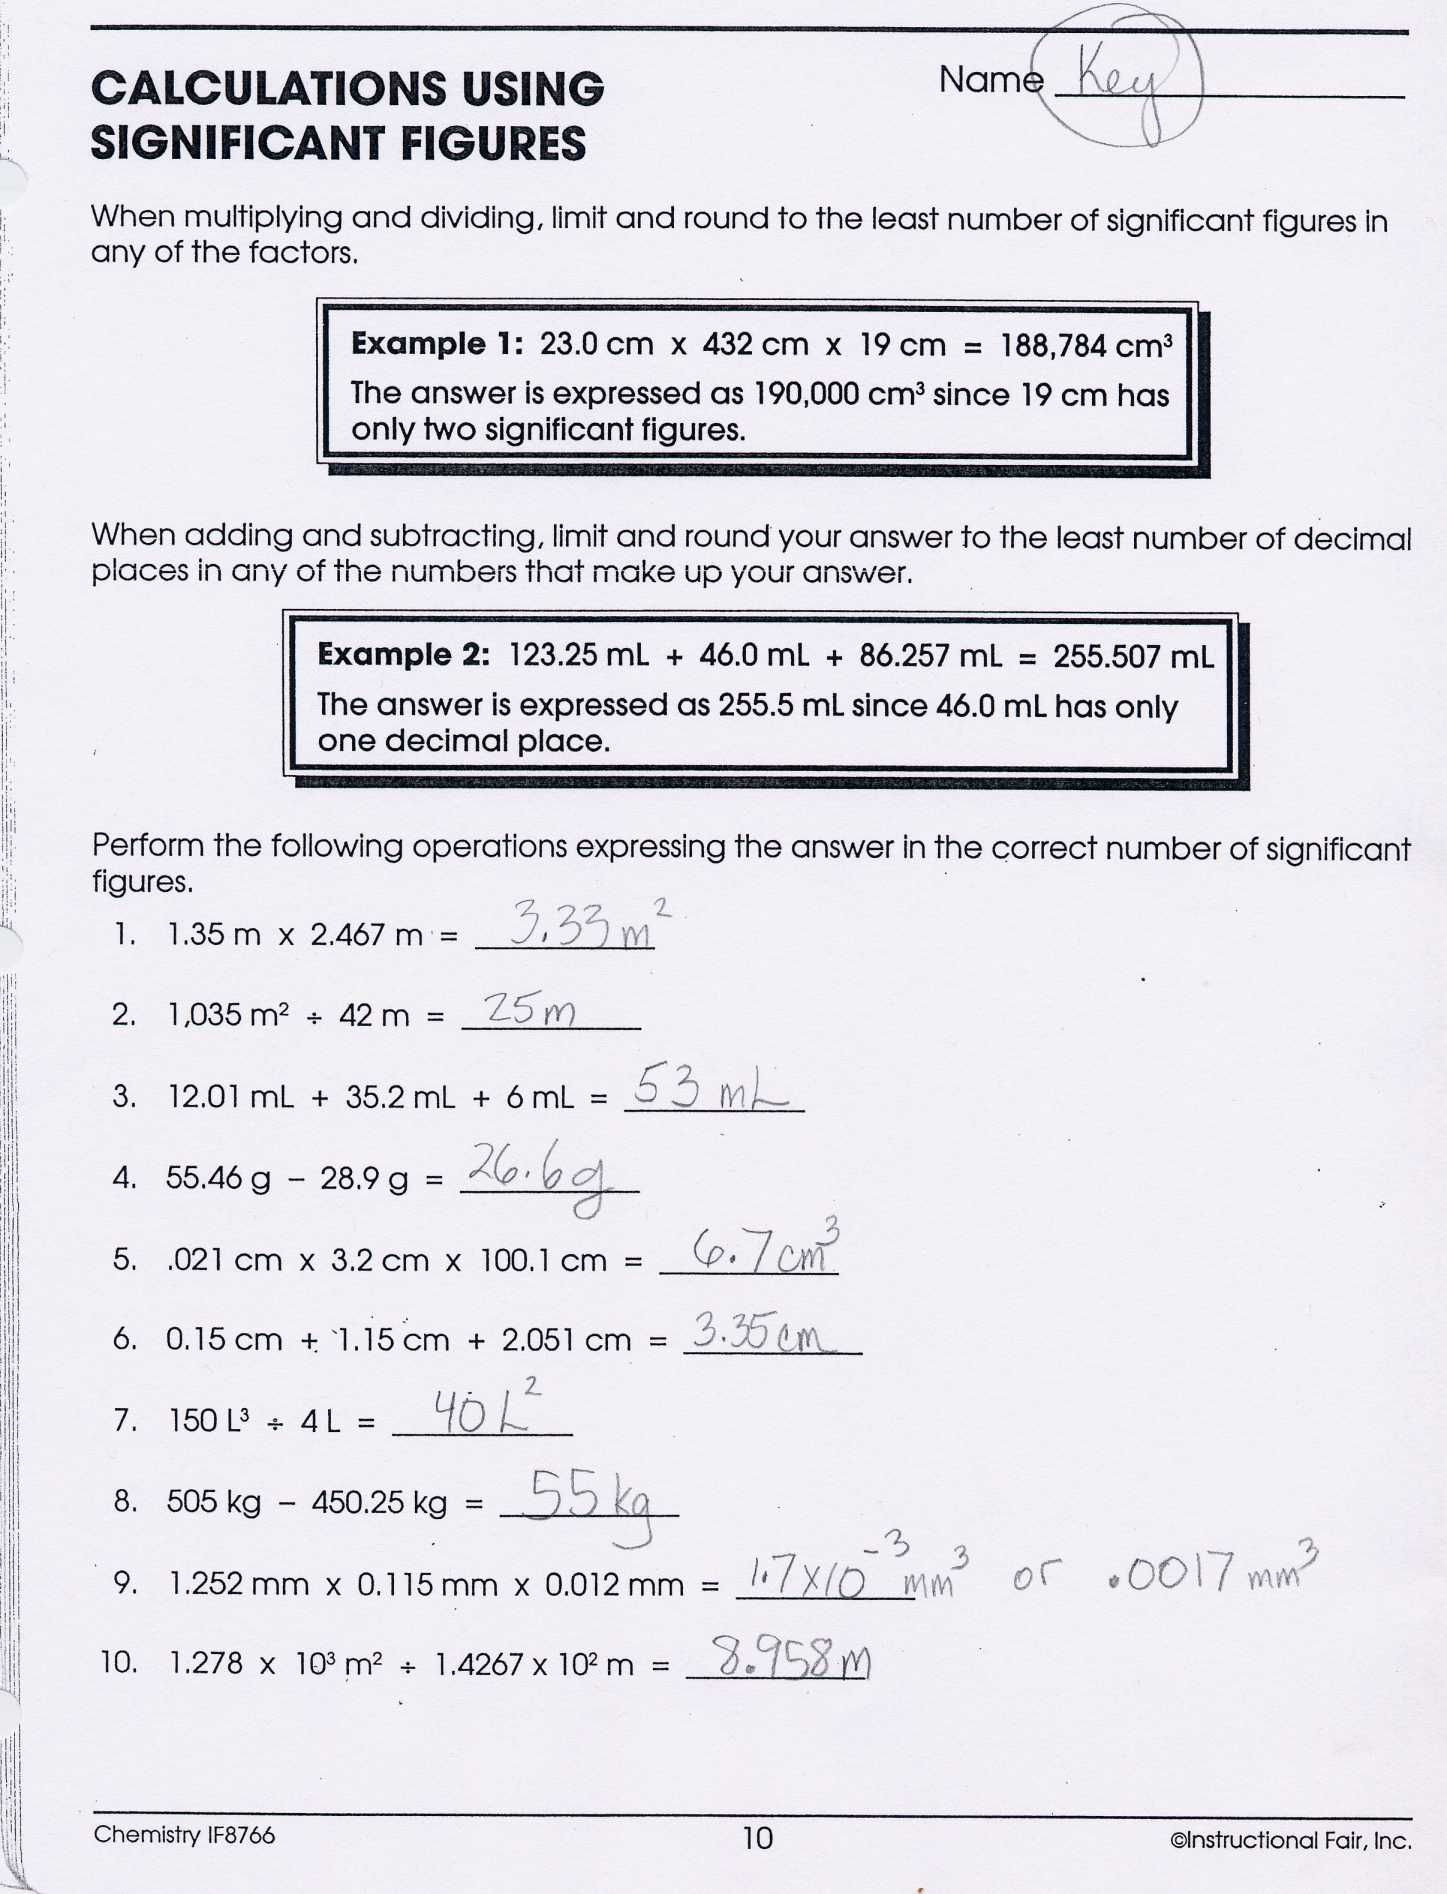 half-life-calculations-worksheet-answers